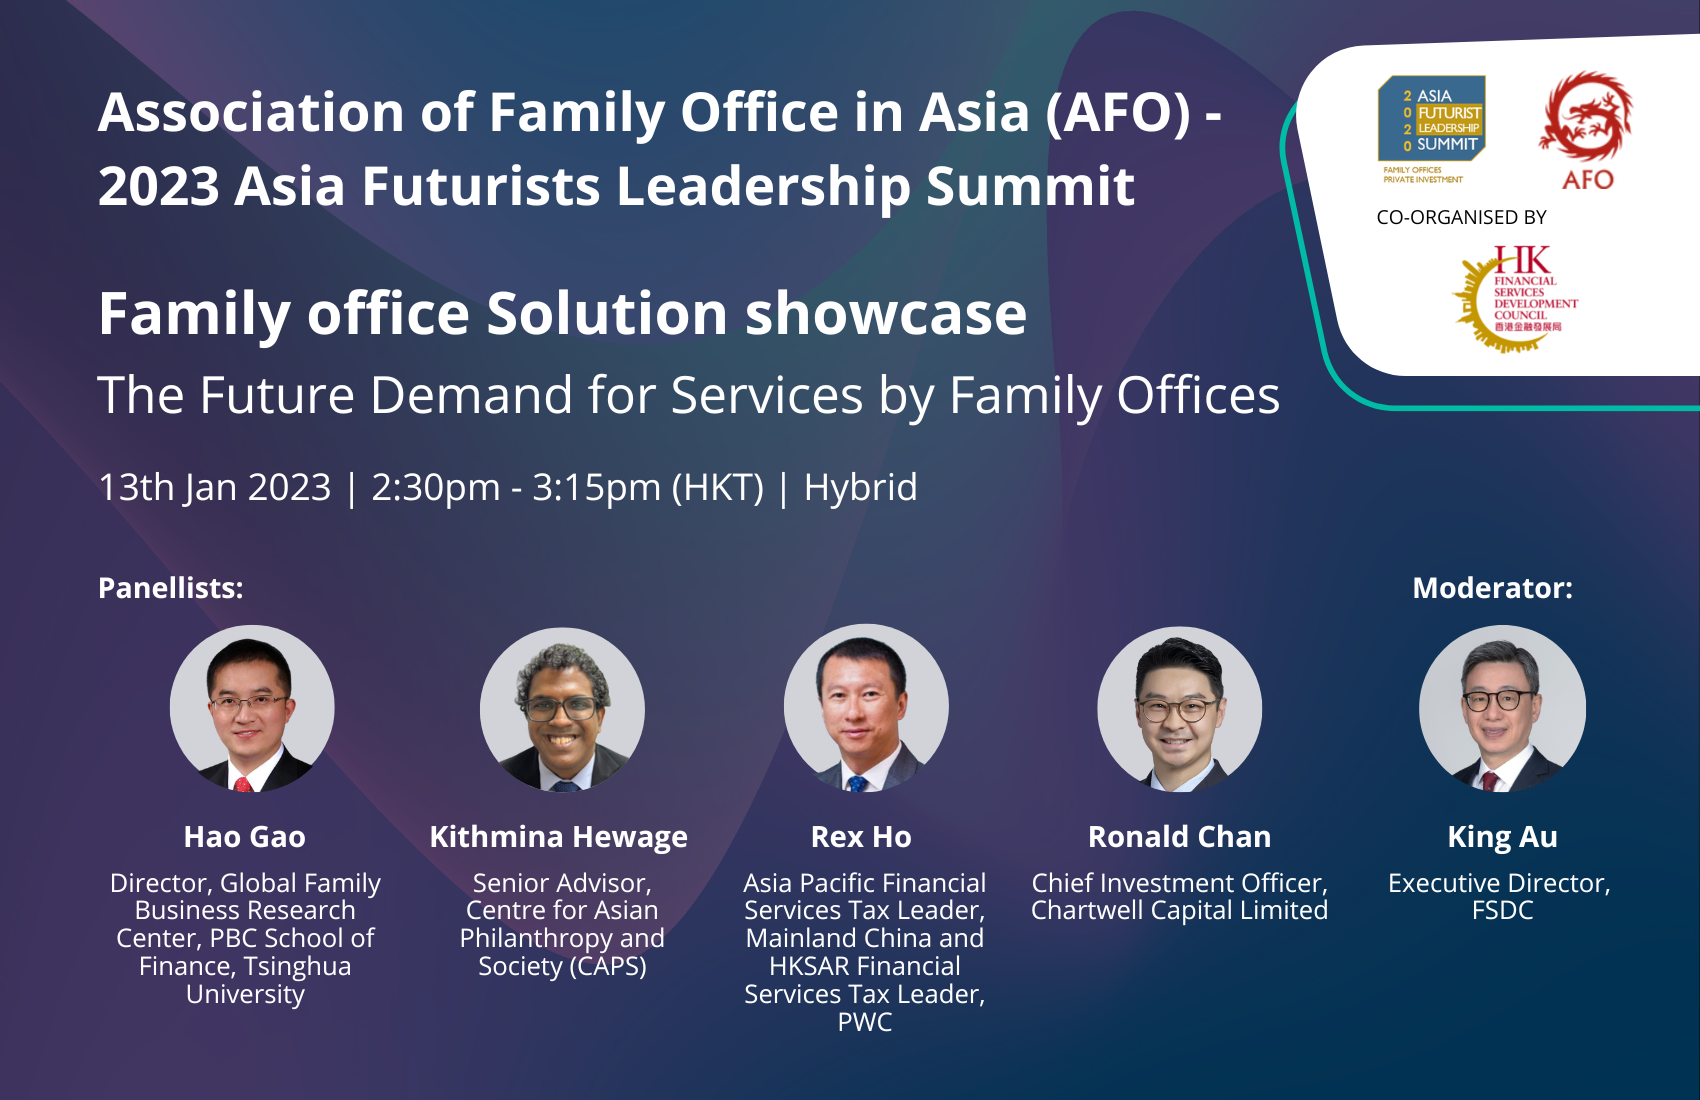 2023 Asia Futurists Leadership Summit - Family office Solution showcase by  Association of Family Office in Asia (AFO)